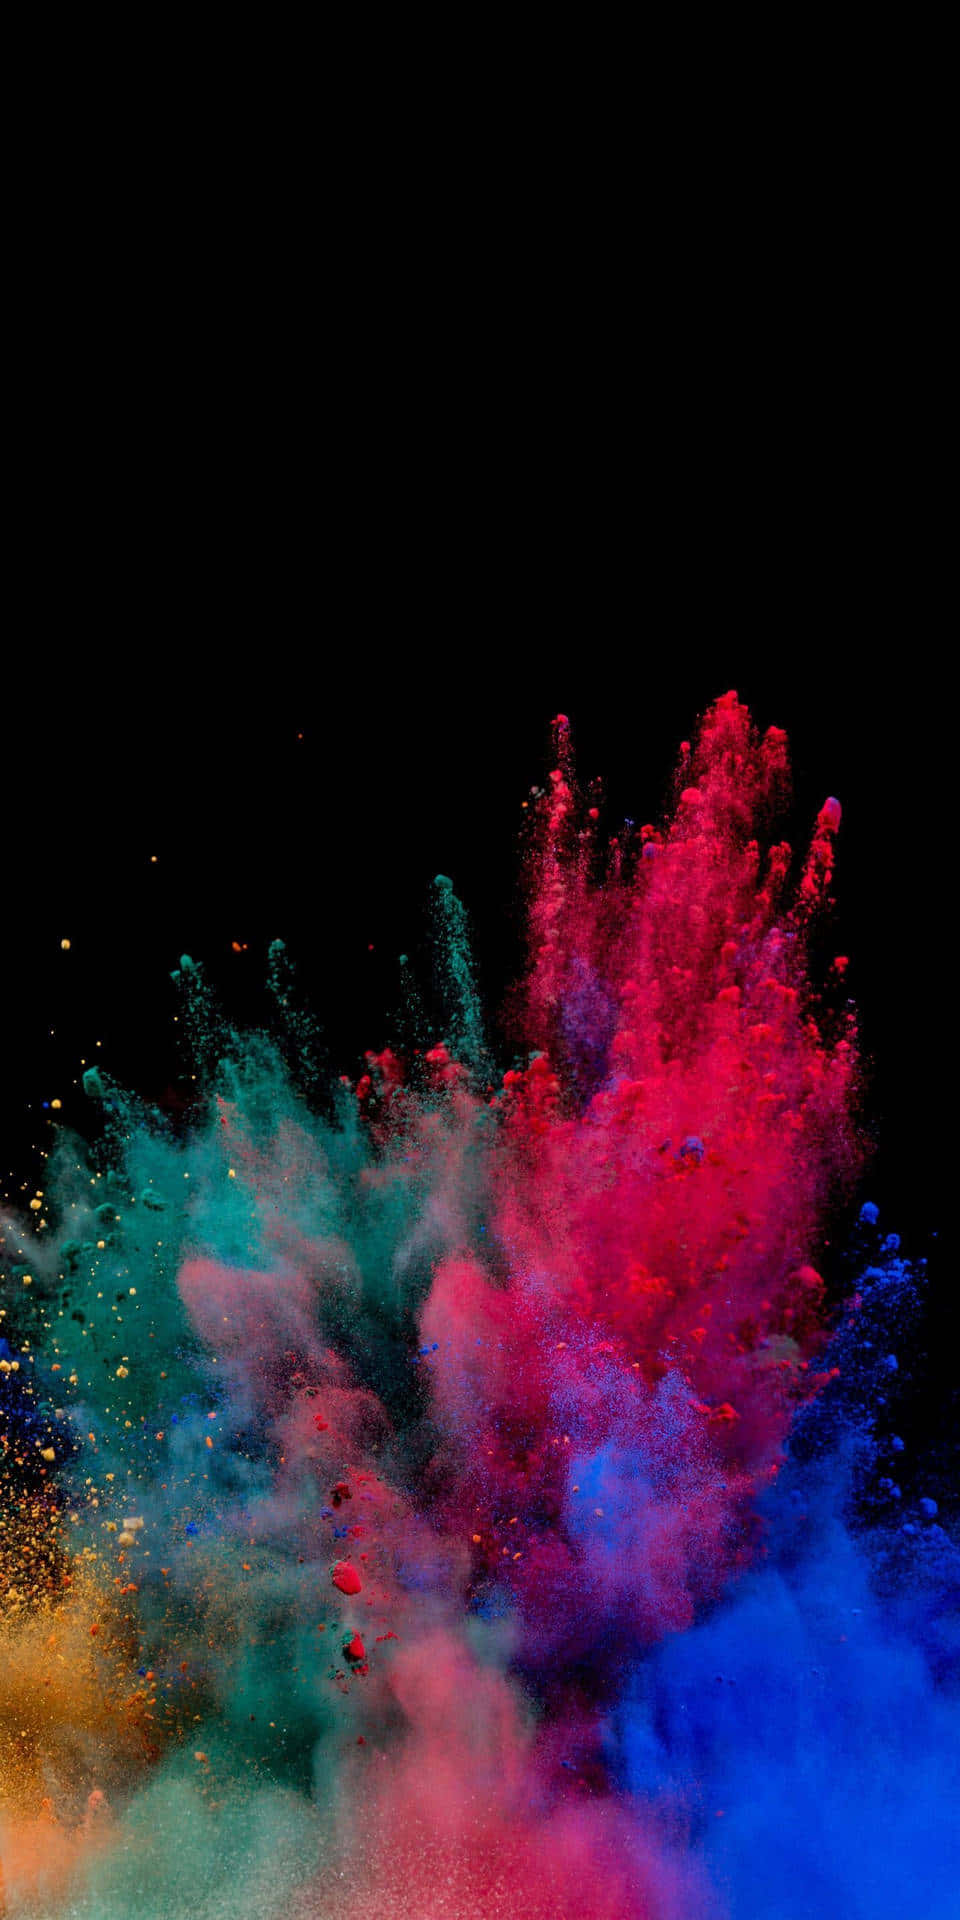 Make a statement with a Colorful Phone Wallpaper